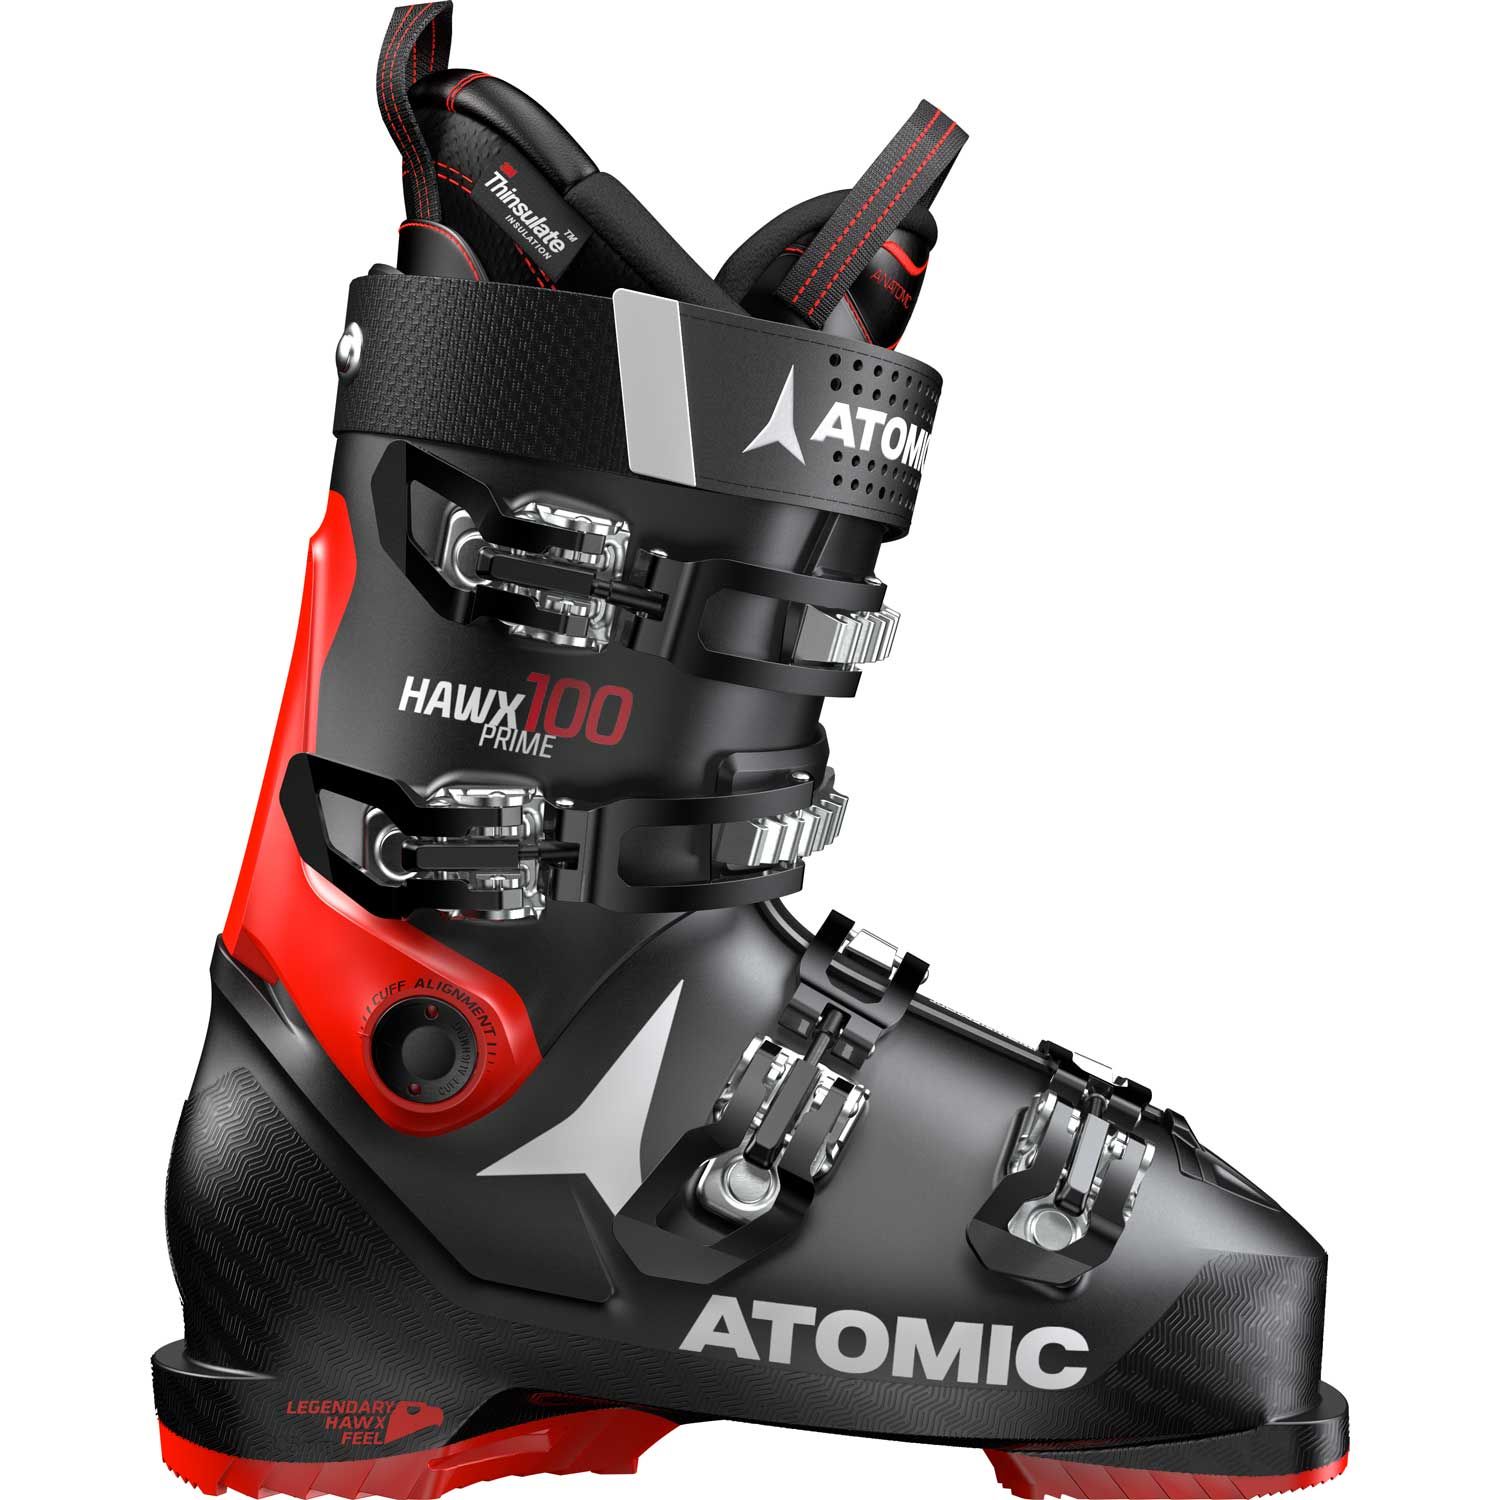 Chaussures HAWX PRIME 100 black red 2019